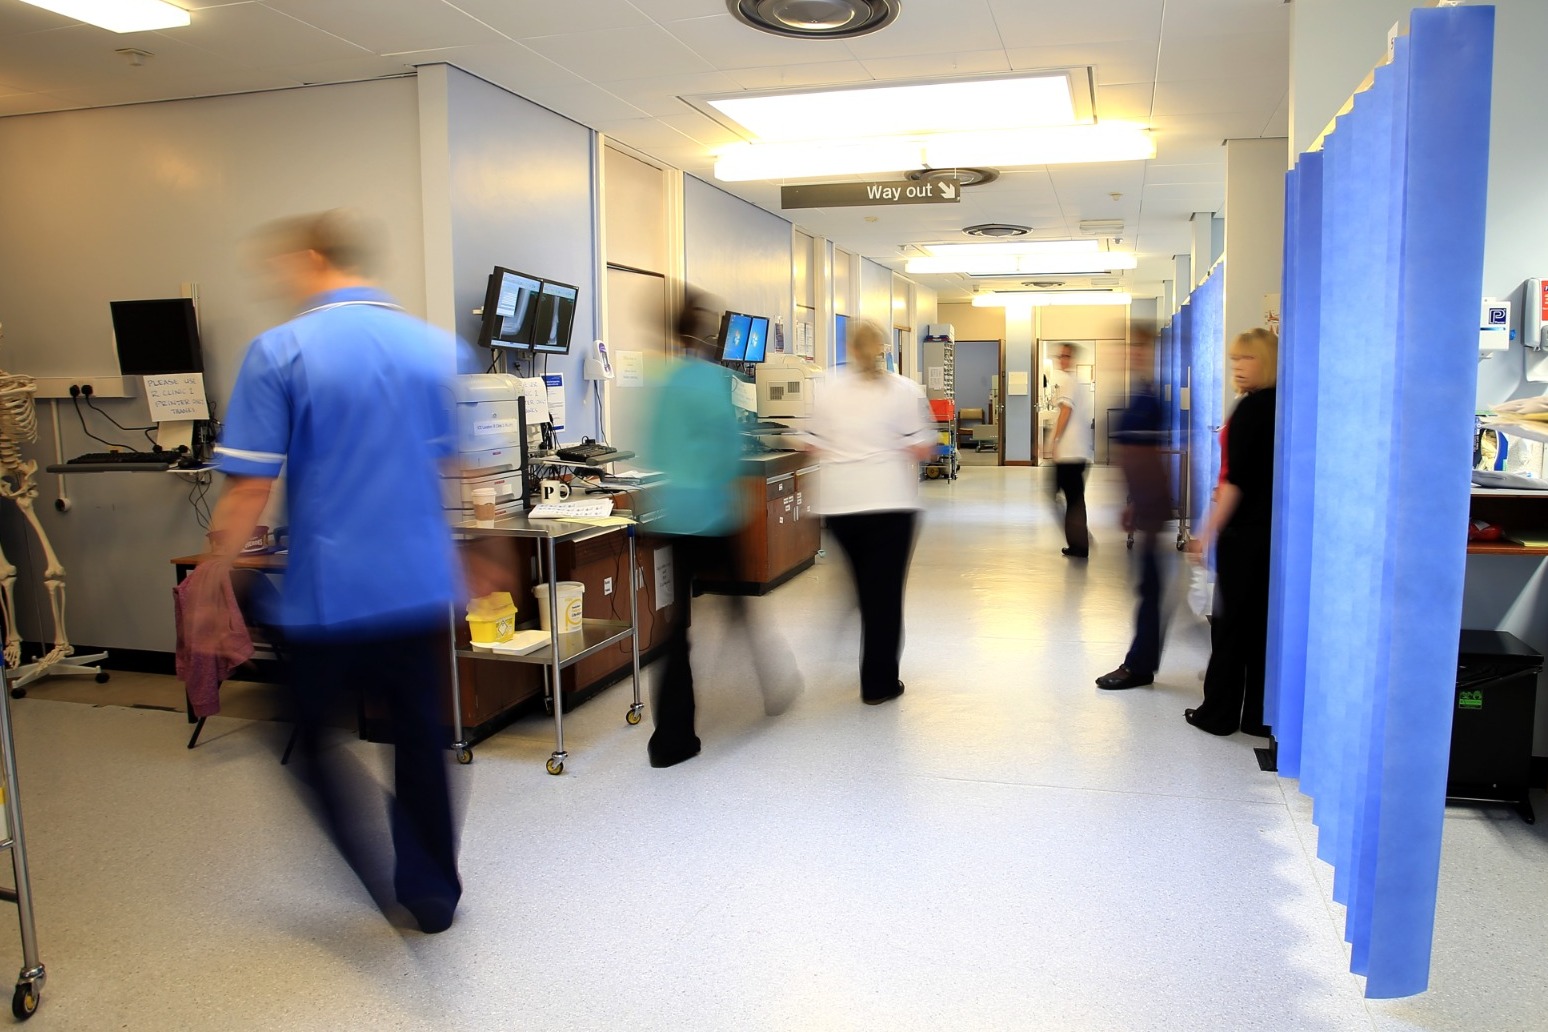 Public concern rising over NHS bed shortages, waiting times and poor care 